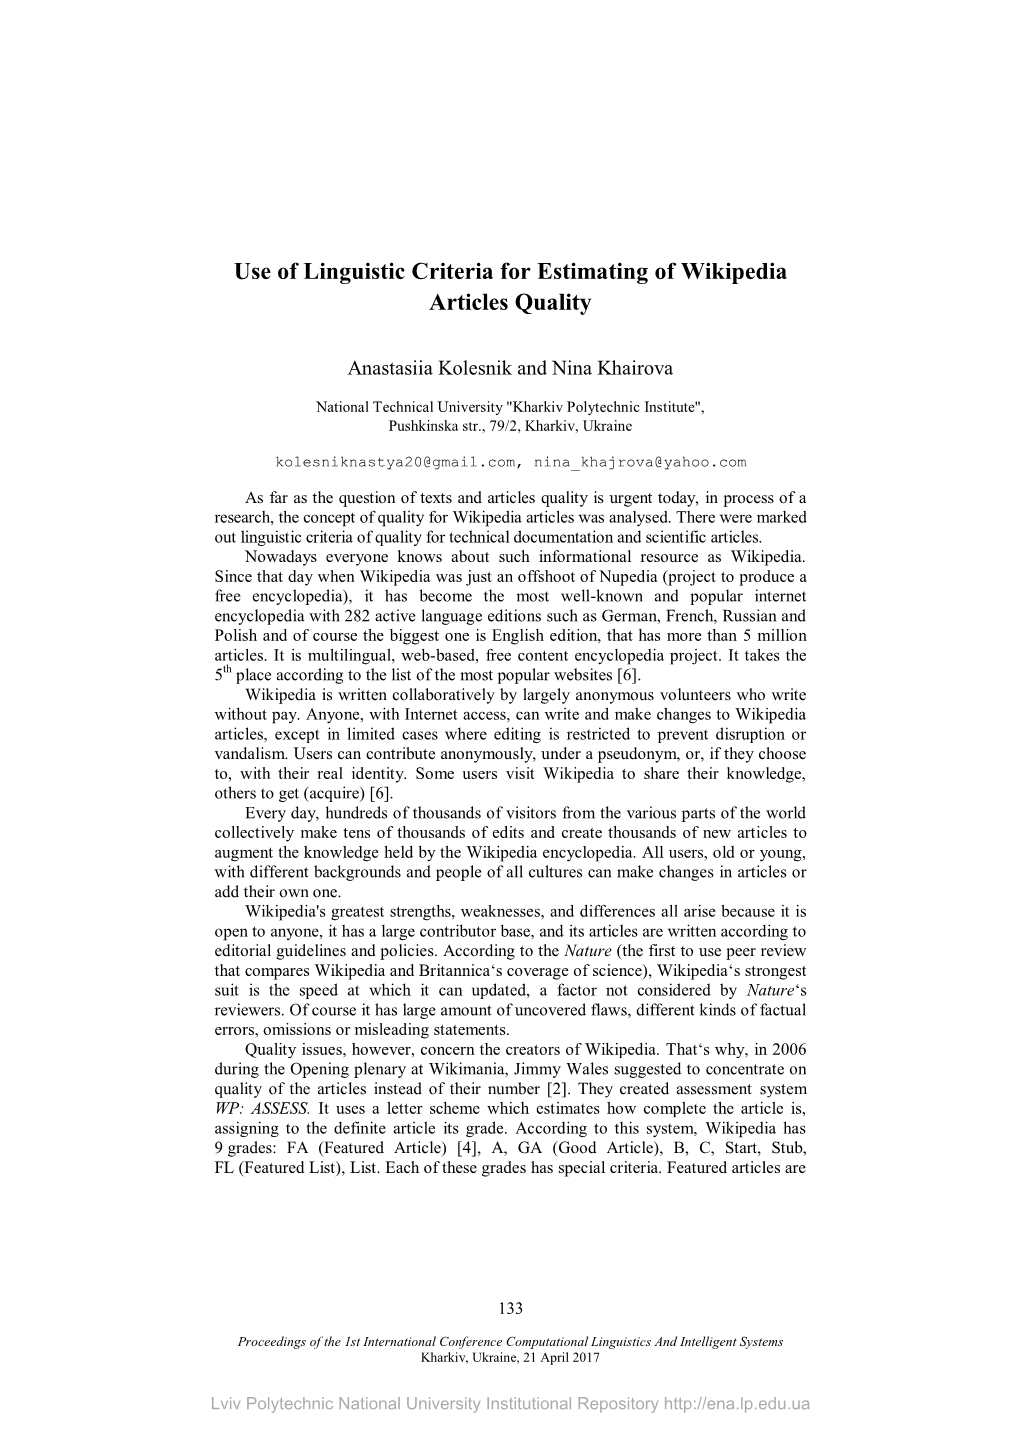 Use of Linguistic Criteria for Estimating of Wikipedia Articles Quality